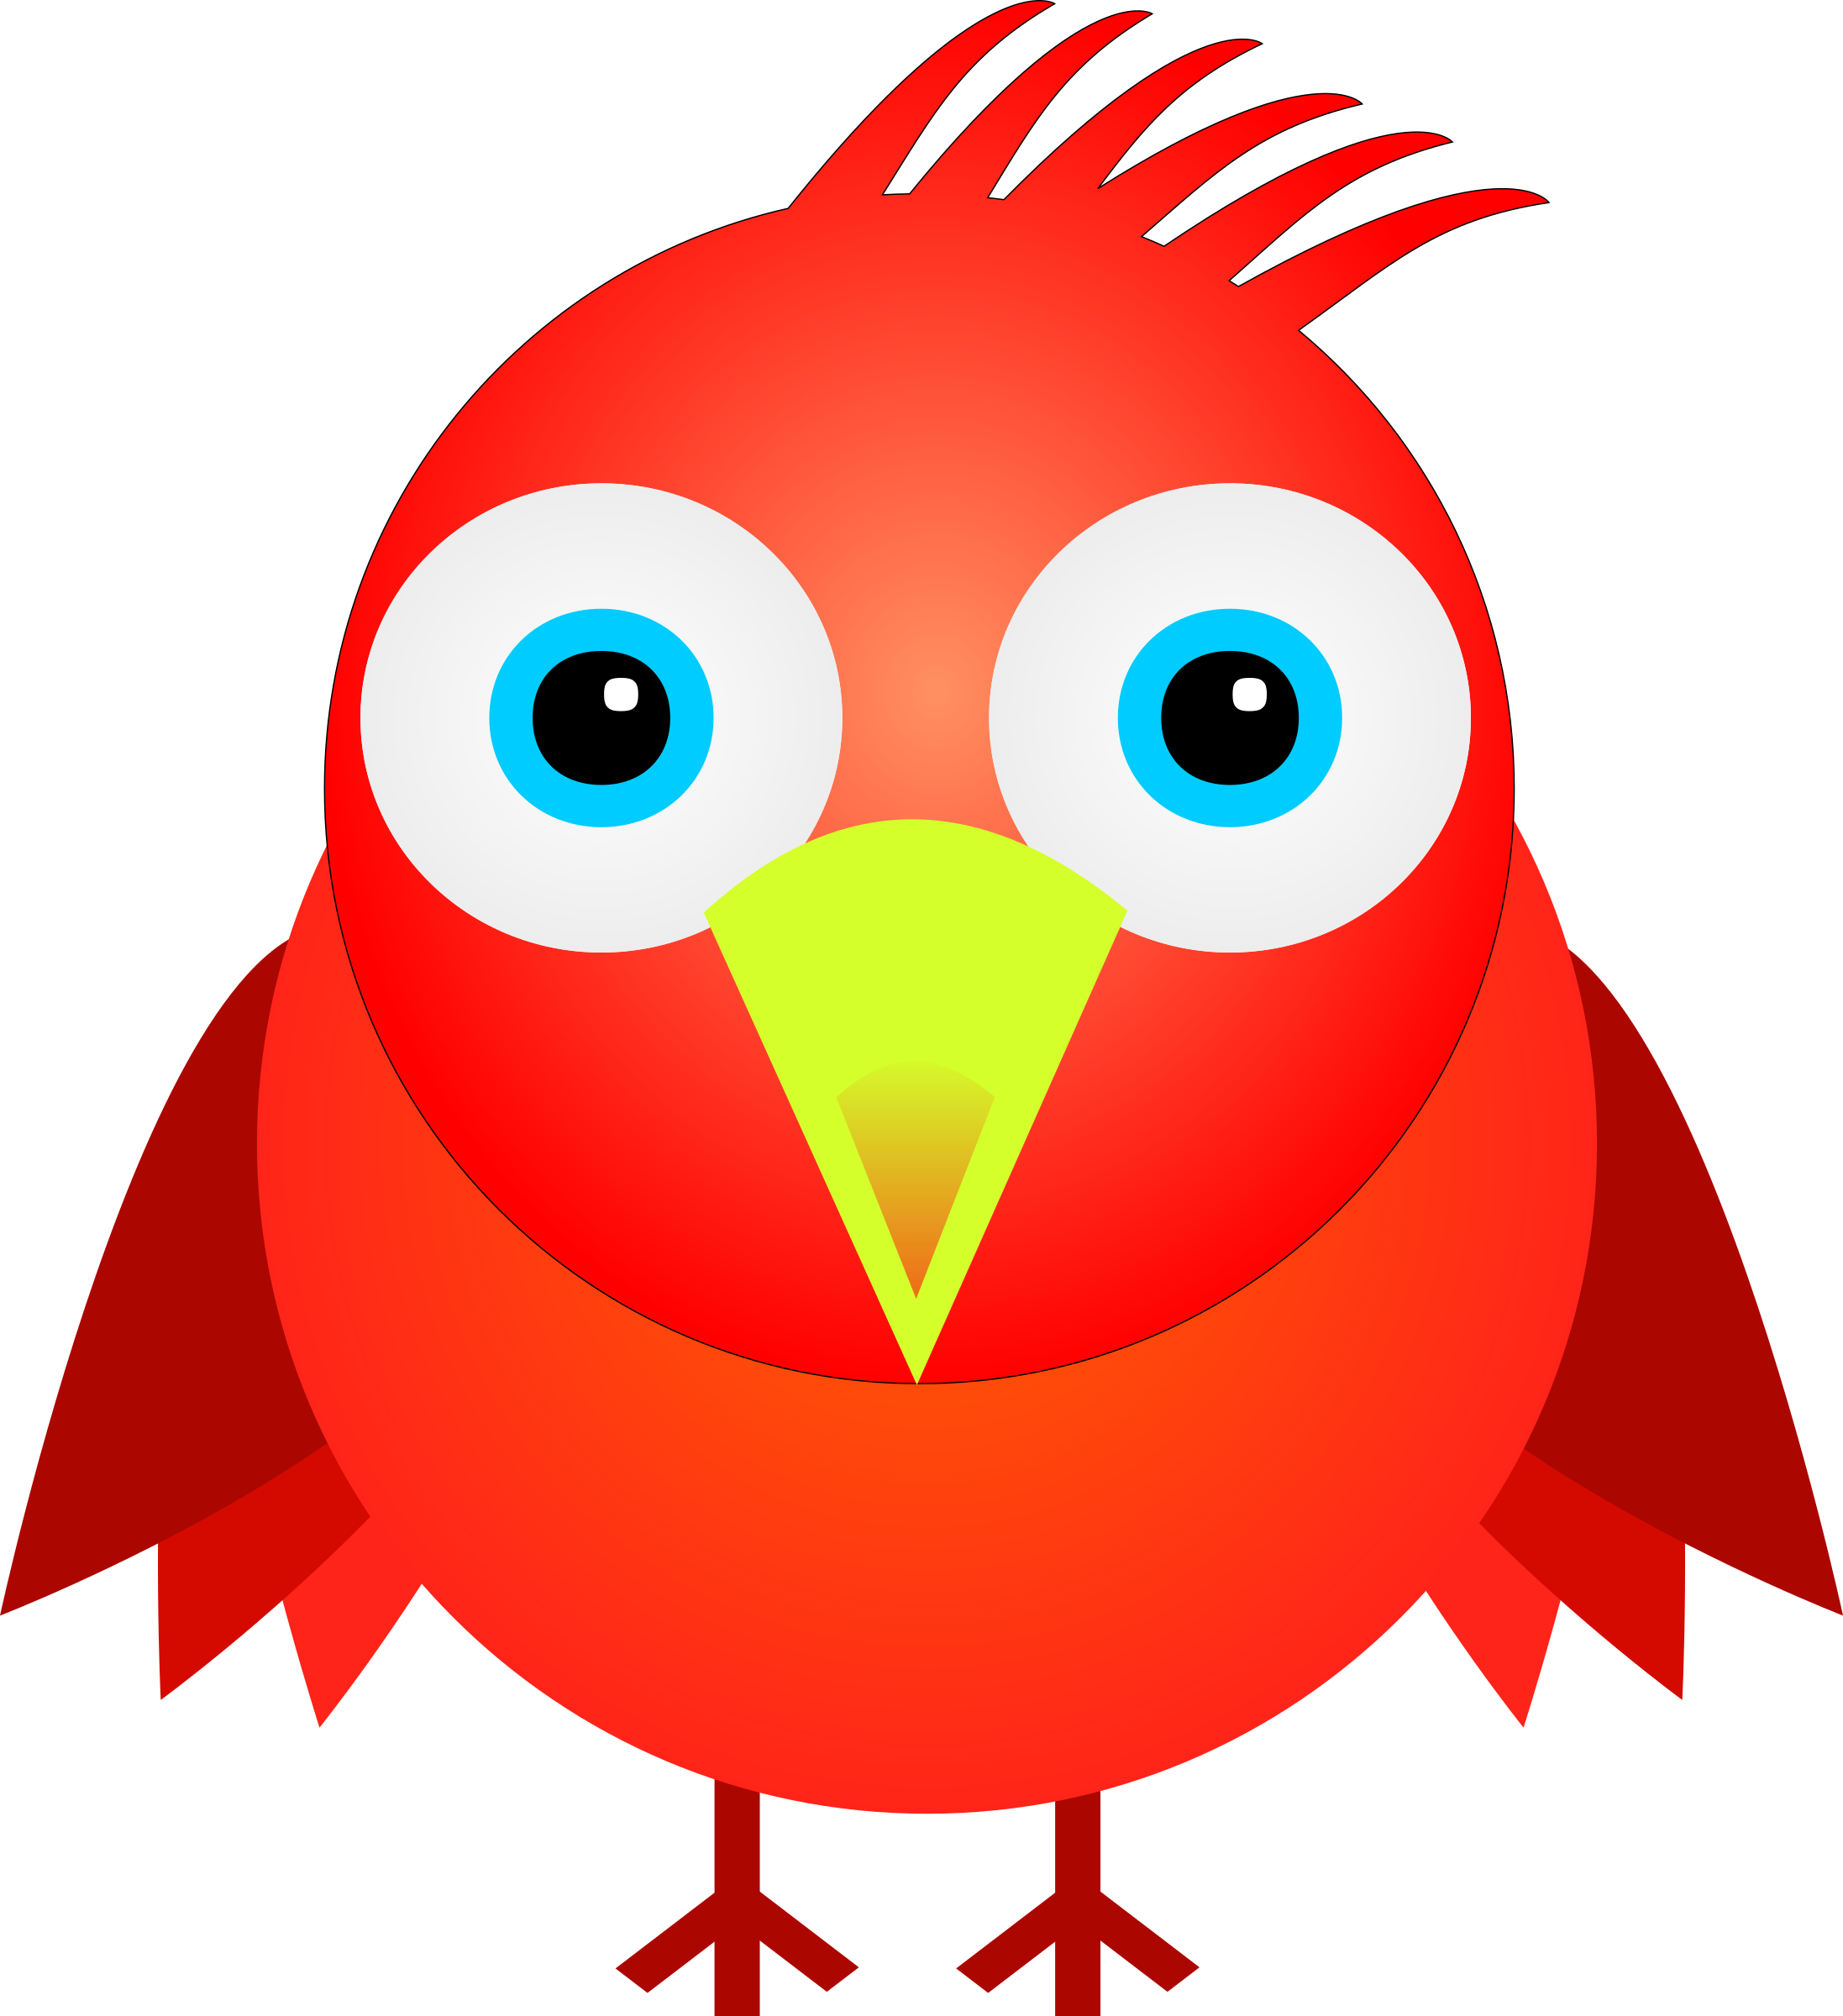 Faces clipart bird. Fluffy big image png